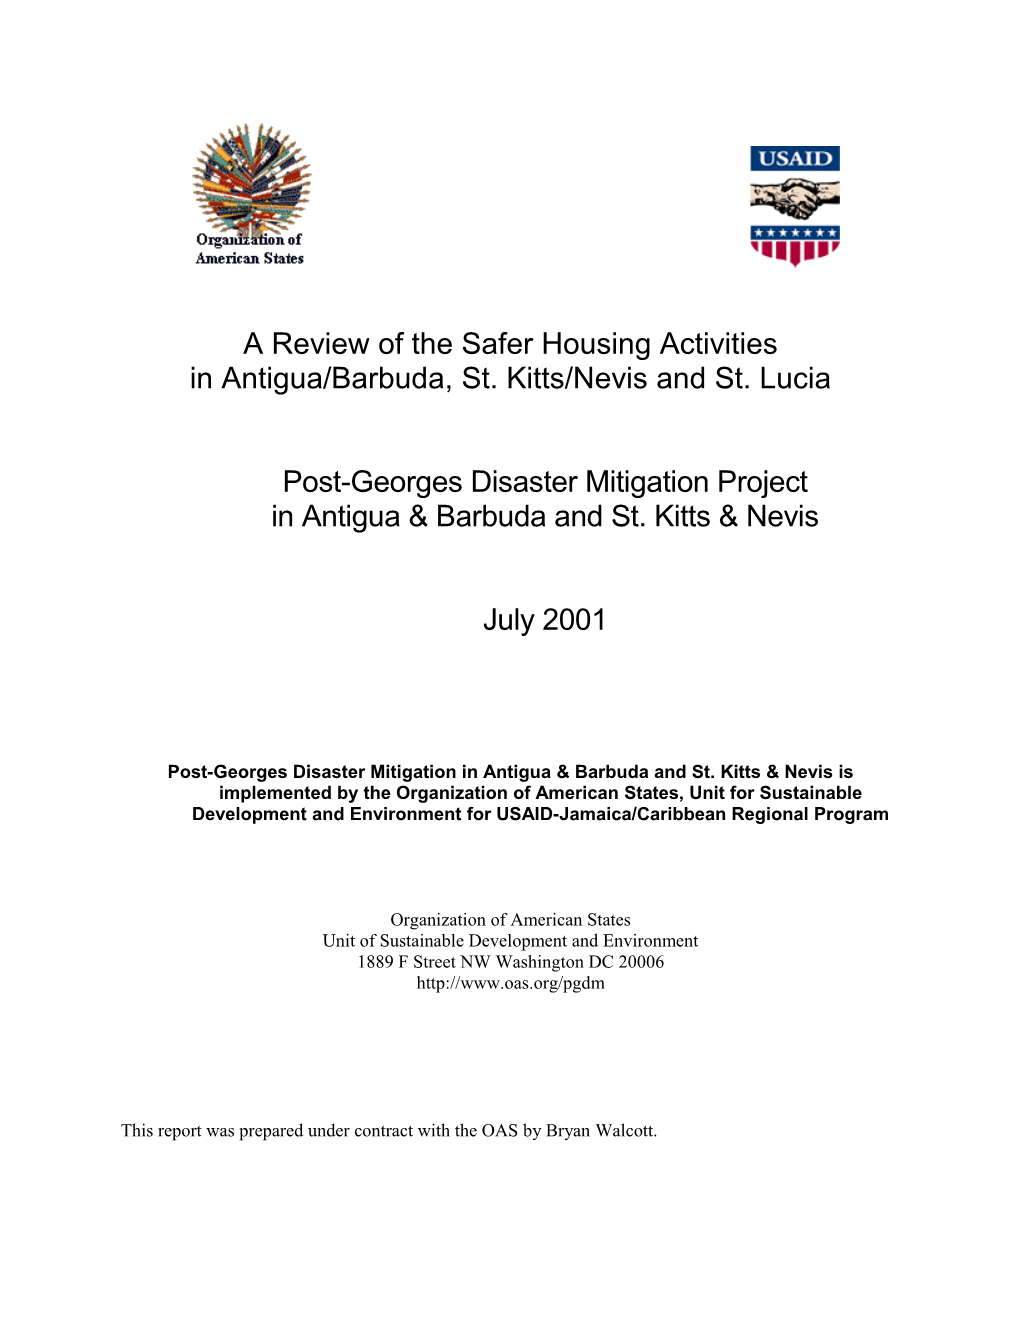 Review of Safer Housing Activities in Antigua/Barbuda, St. Kitts/Nevis and St. Lucia